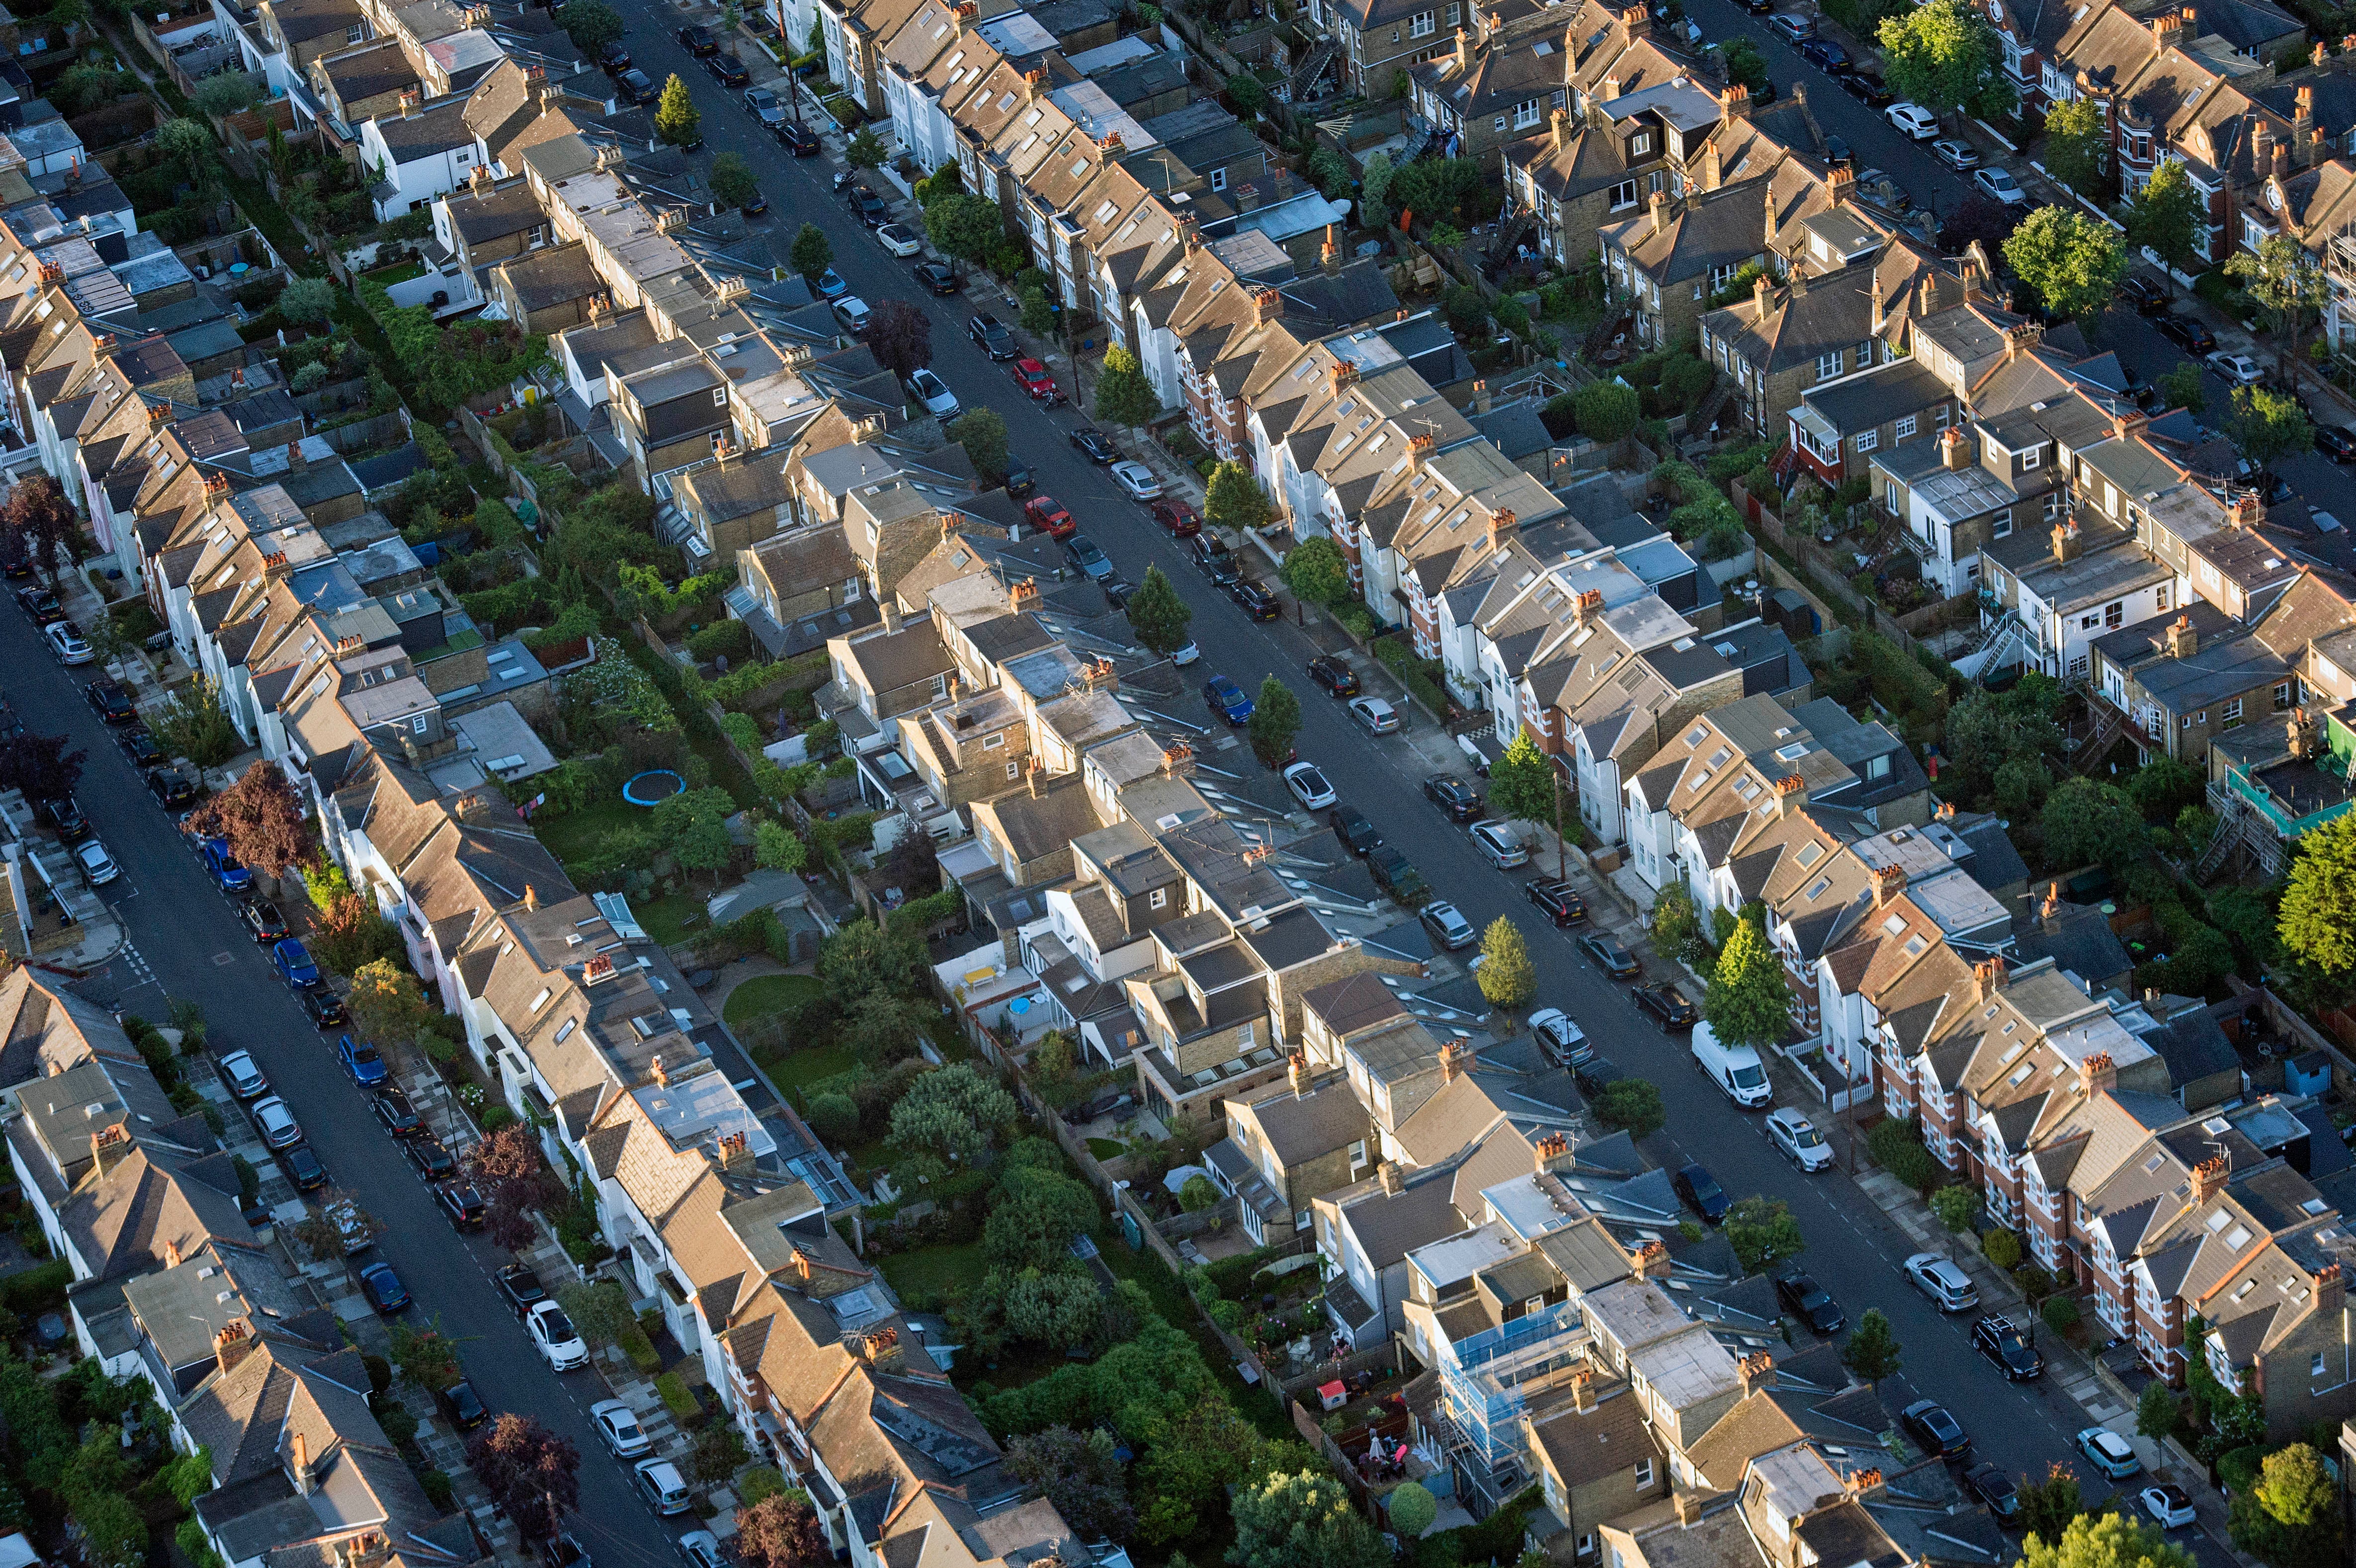 House sales plunged by 52.0% month-on-month in October, figures show (Victoria Jones/PA)